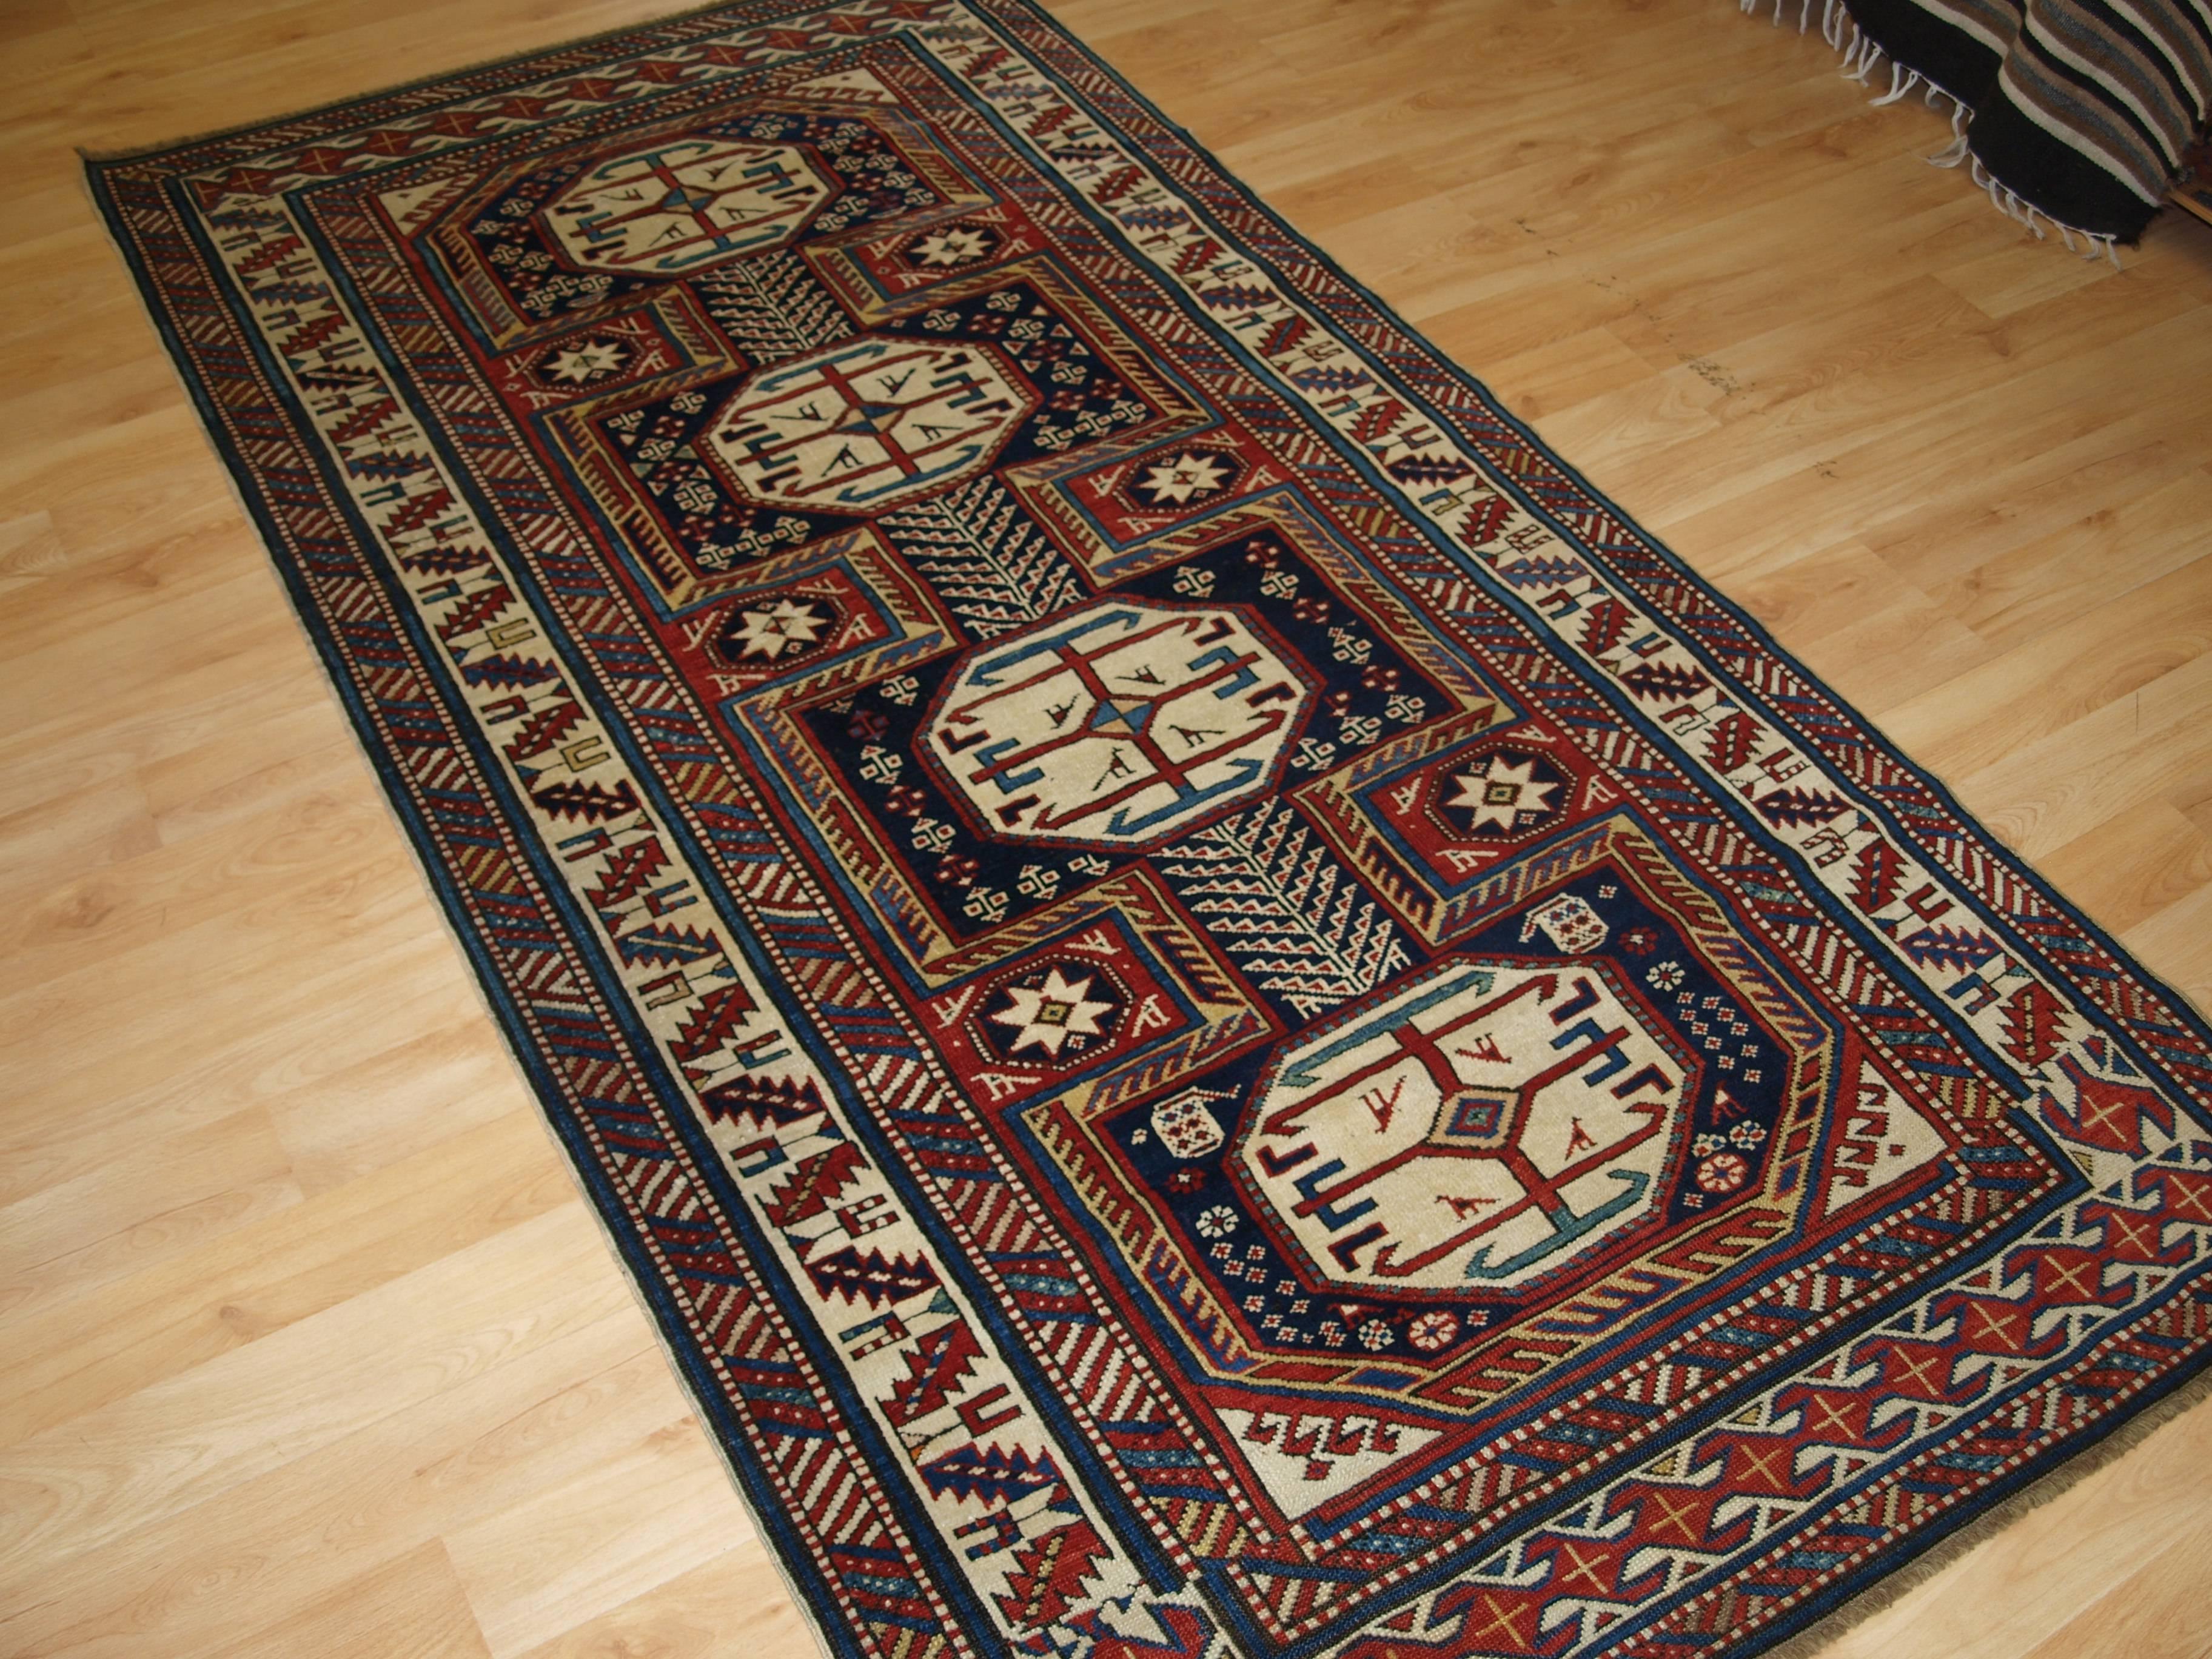 Antique Caucasian Shirvan Rug with 'Surahani' Garden Design, Late 19th Century For Sale 6